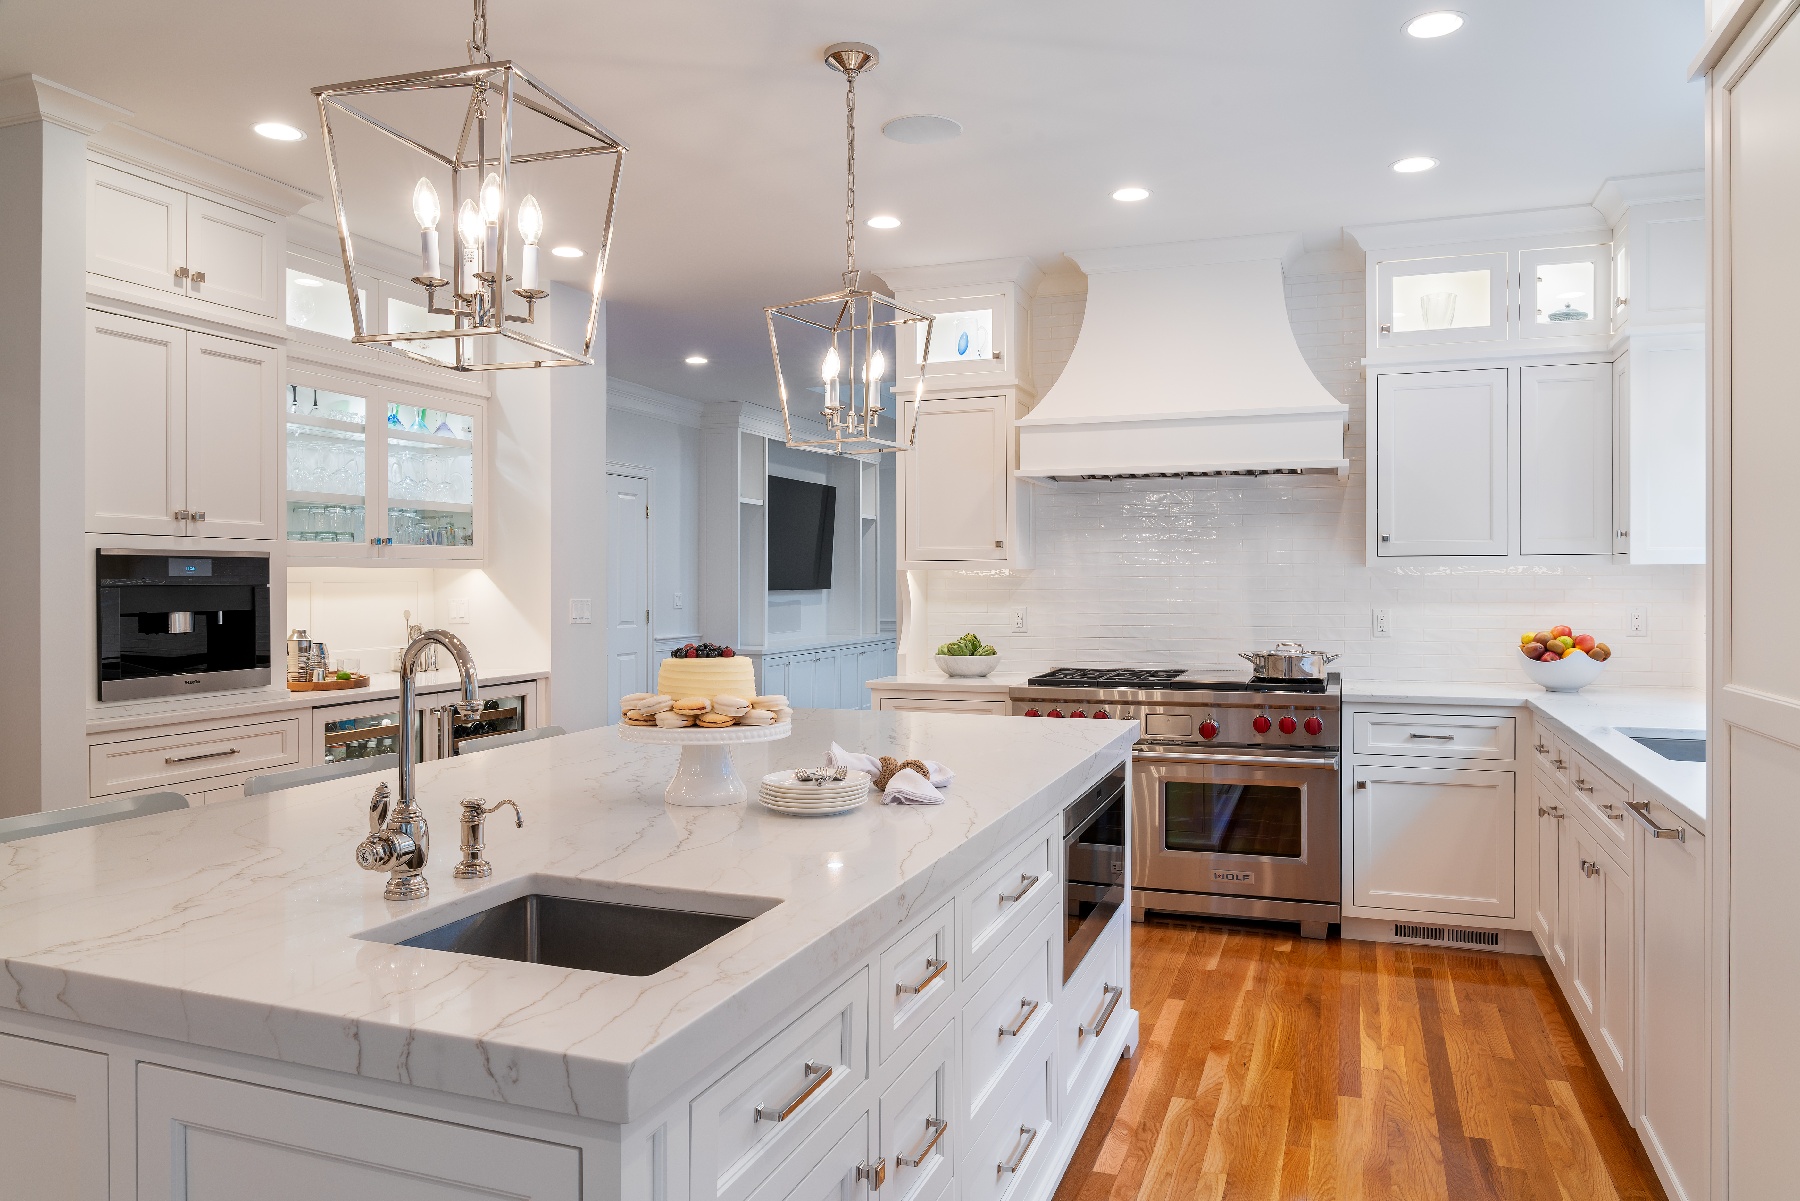 Case Study: Creating a Stunning Everyday Living Kitchen That is Family-Centric